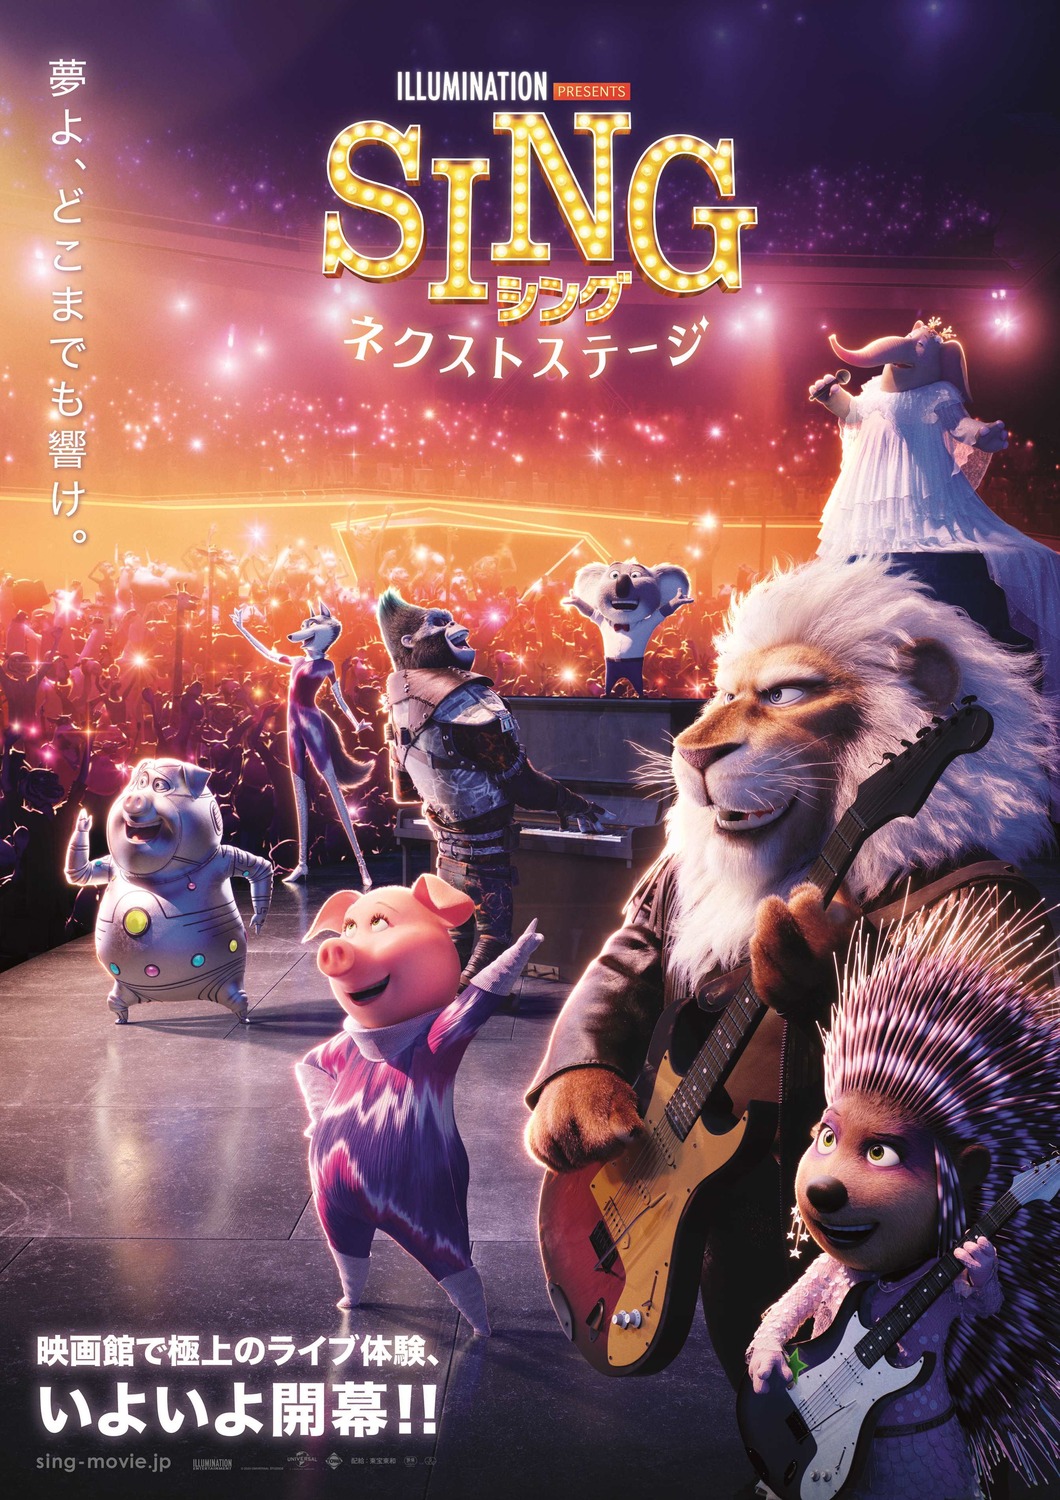 Extra Large Movie Poster Image for Sing 2 (#38 of 38)